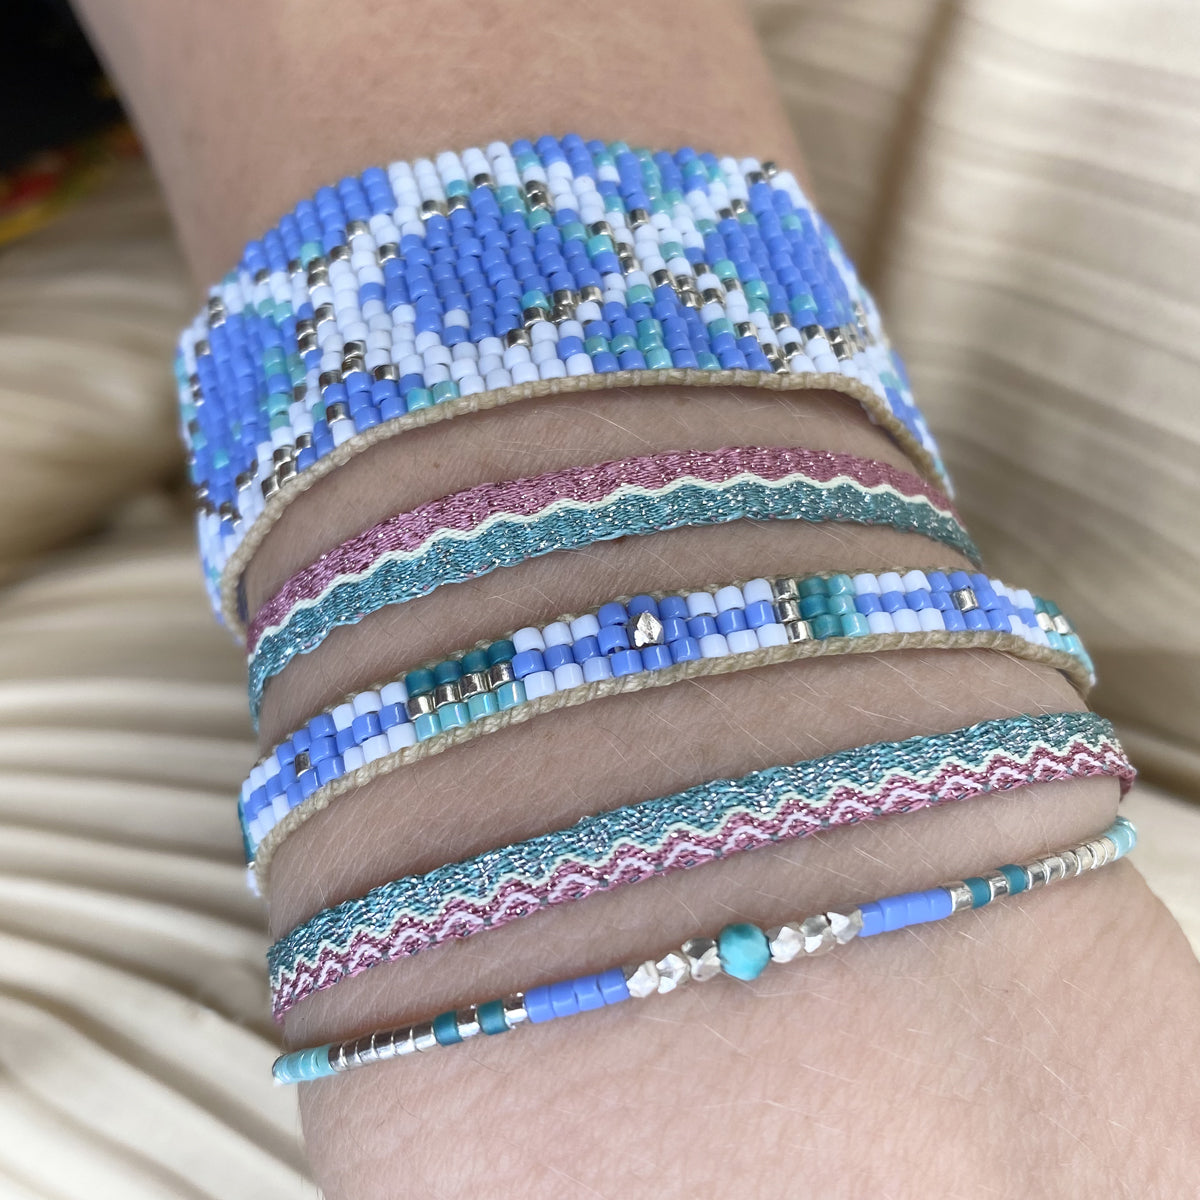 BASIC HANDWOVEN SPARKLE BRACELET IN TEAL AND PURPLE